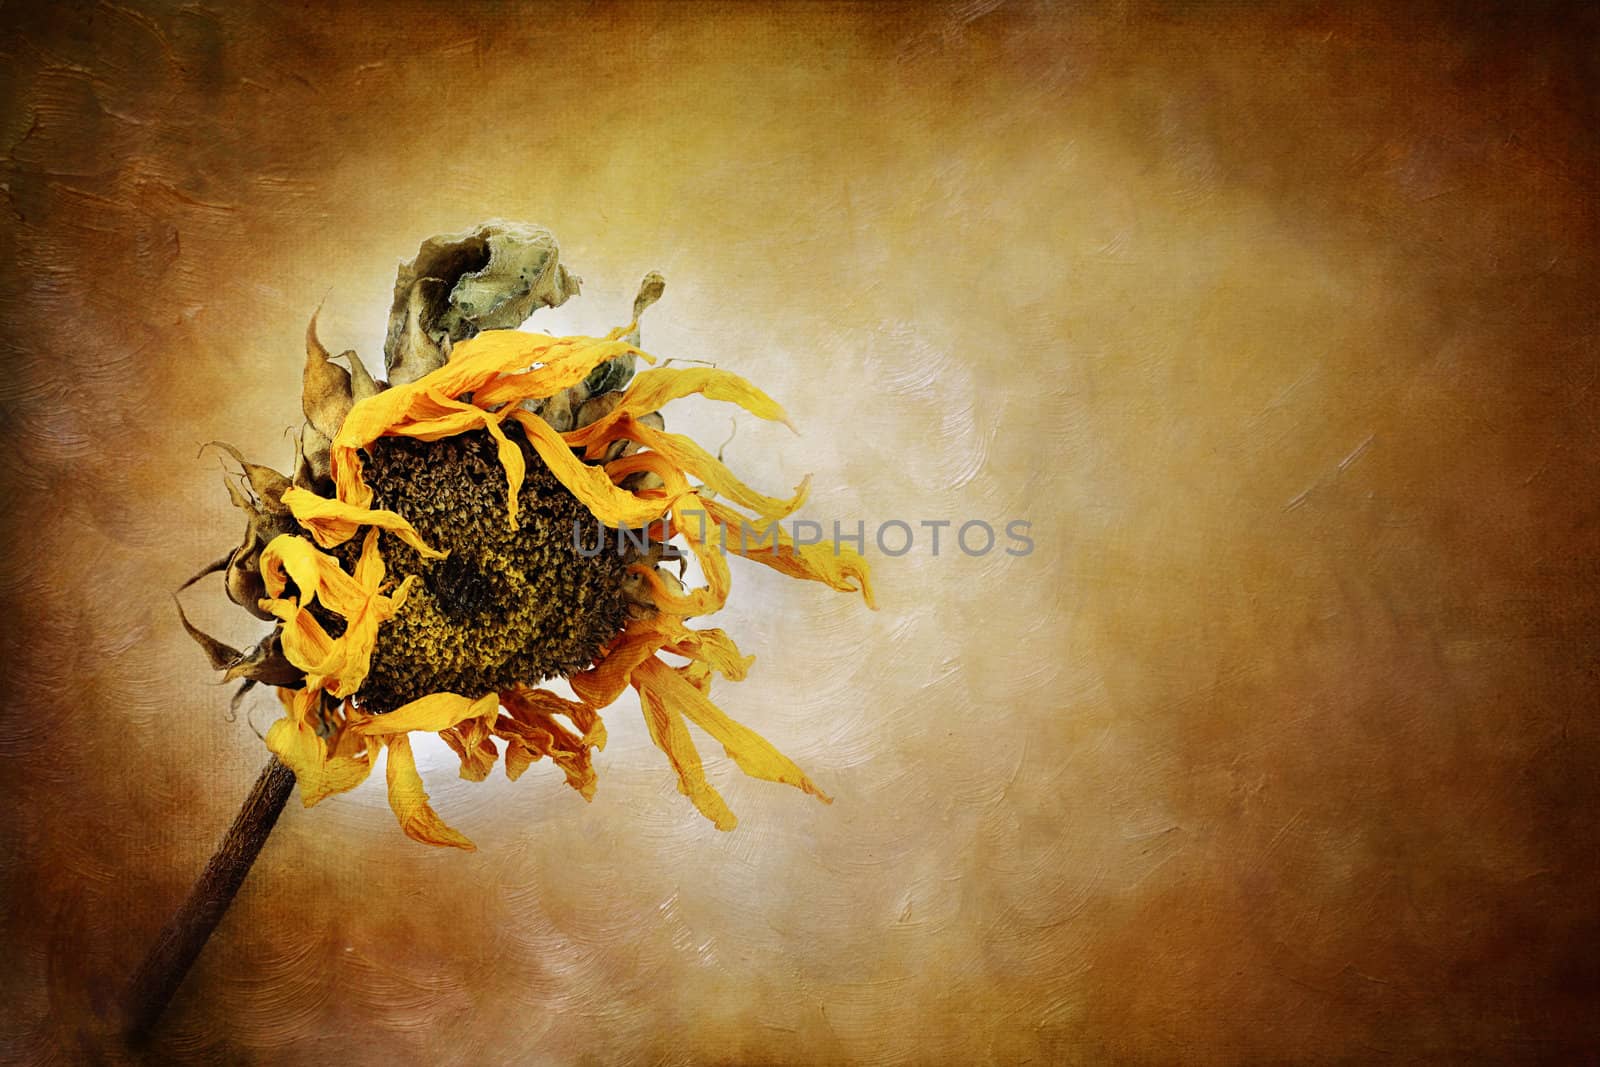 Dried sunflower with painterly effect.

